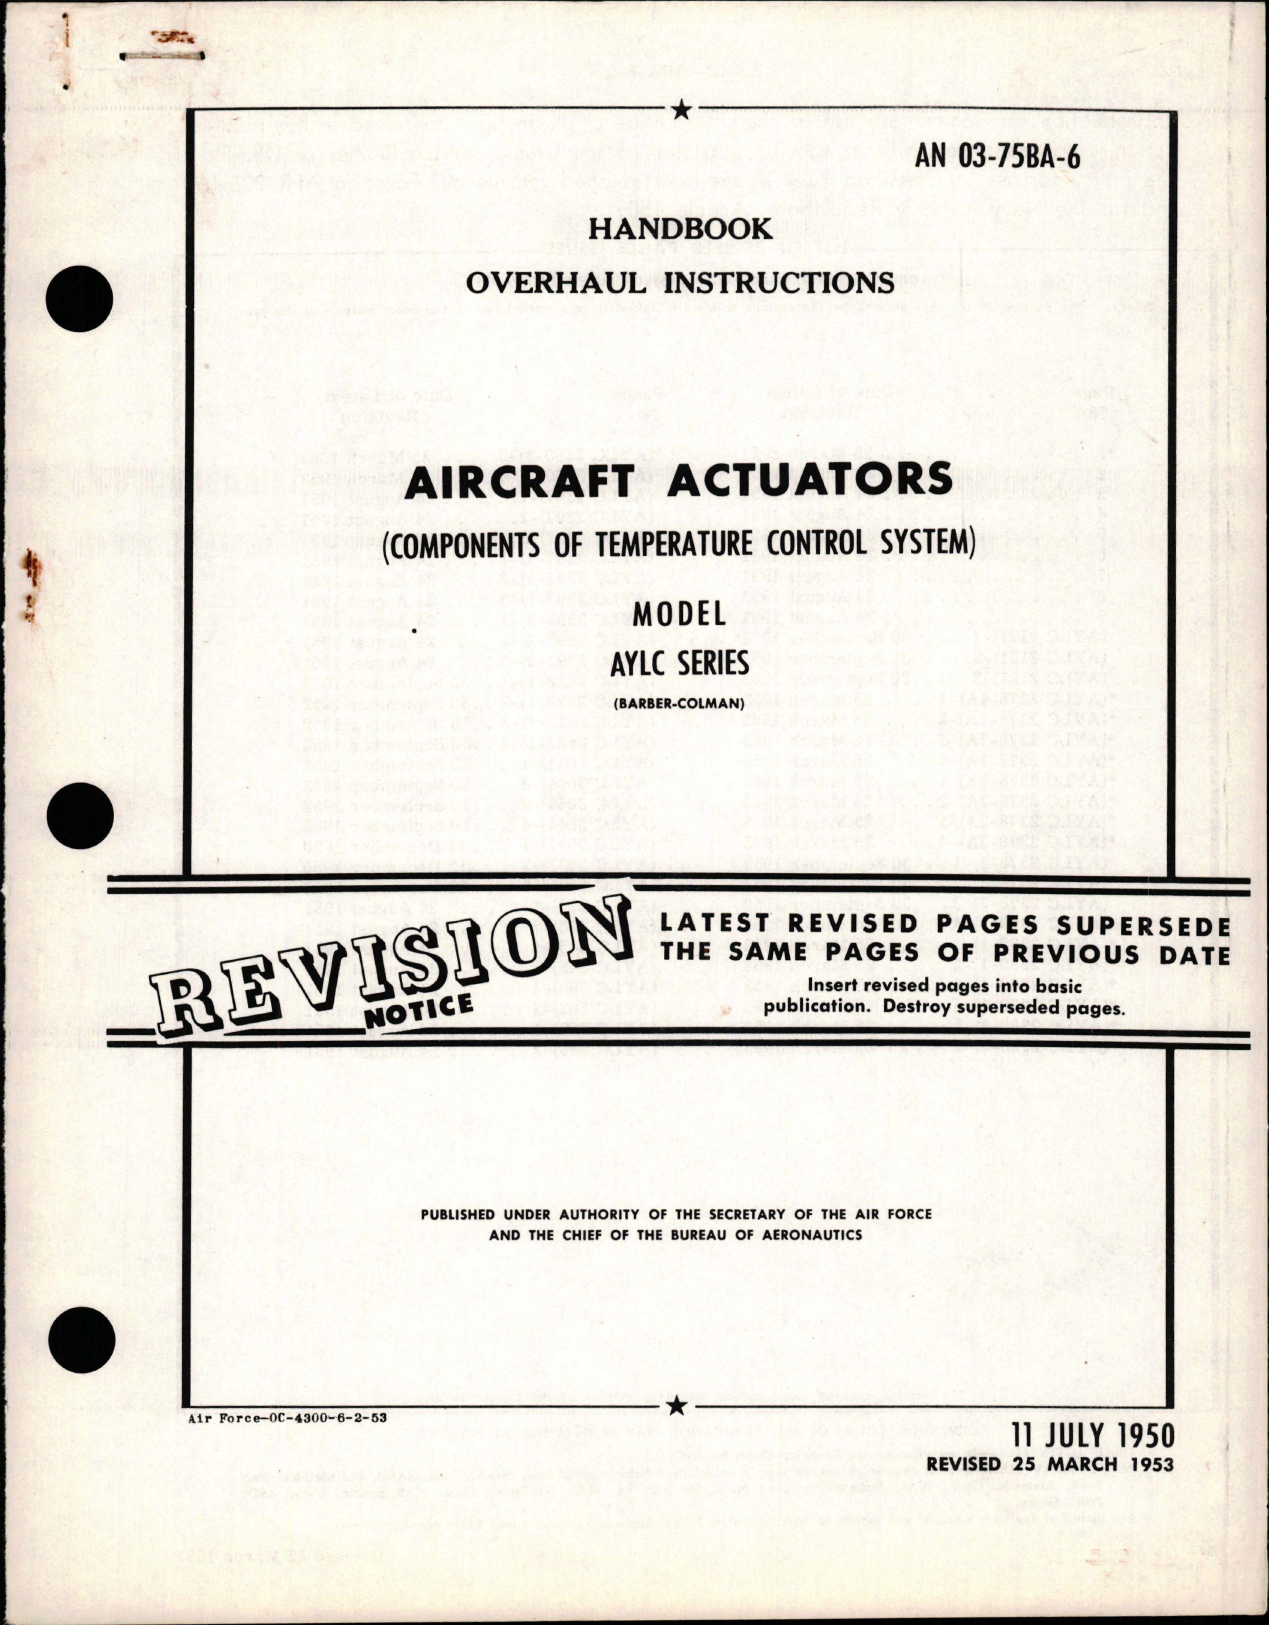 Sample page 1 from AirCorps Library document: Overhaul Instructions for Aircraft Actuators - Model AYLC Series 